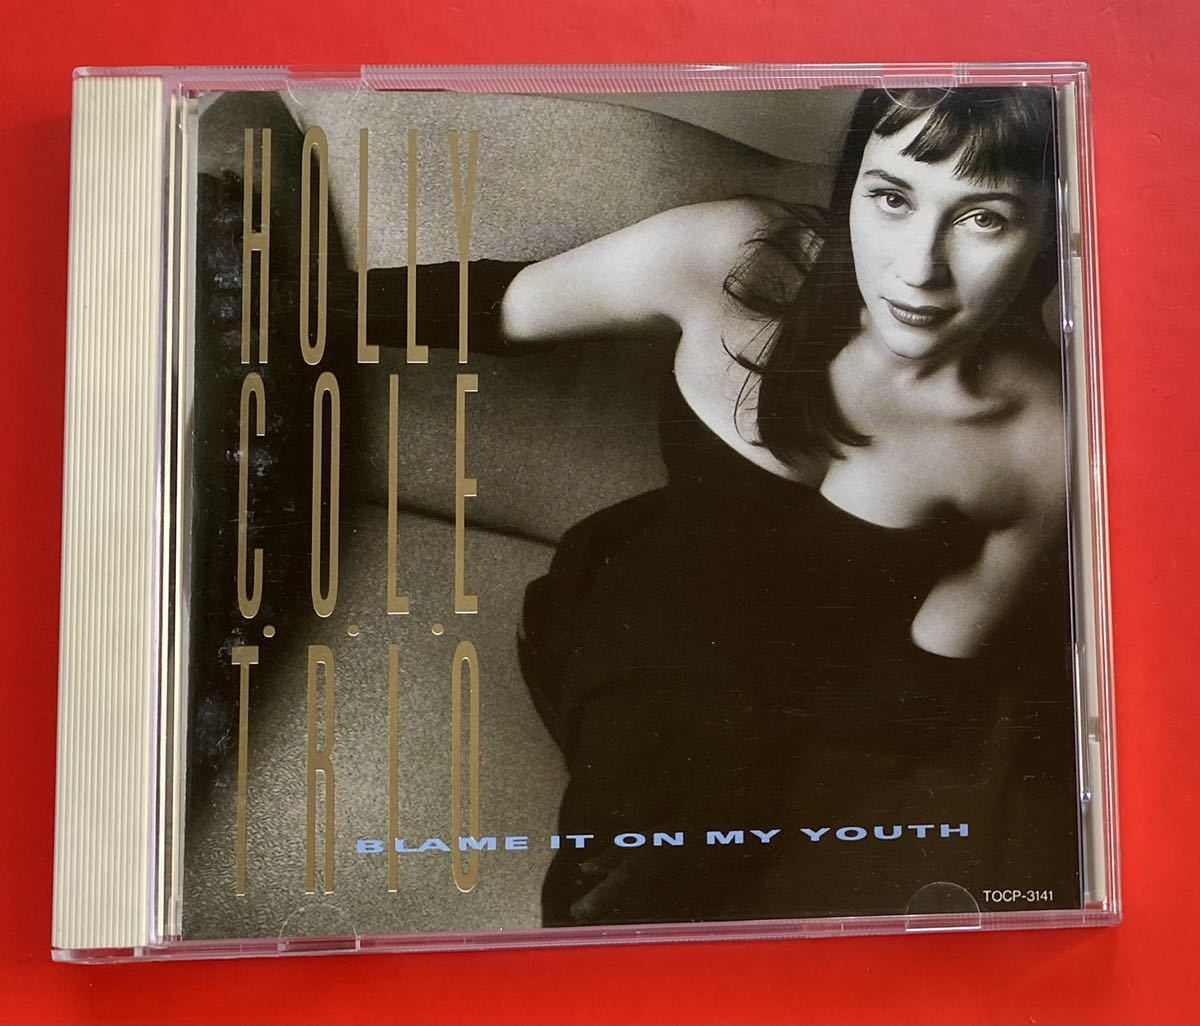 【CD】ホリー・コール「Blame It On My Youth」Holly Cole 国内盤 [12040550]_画像1